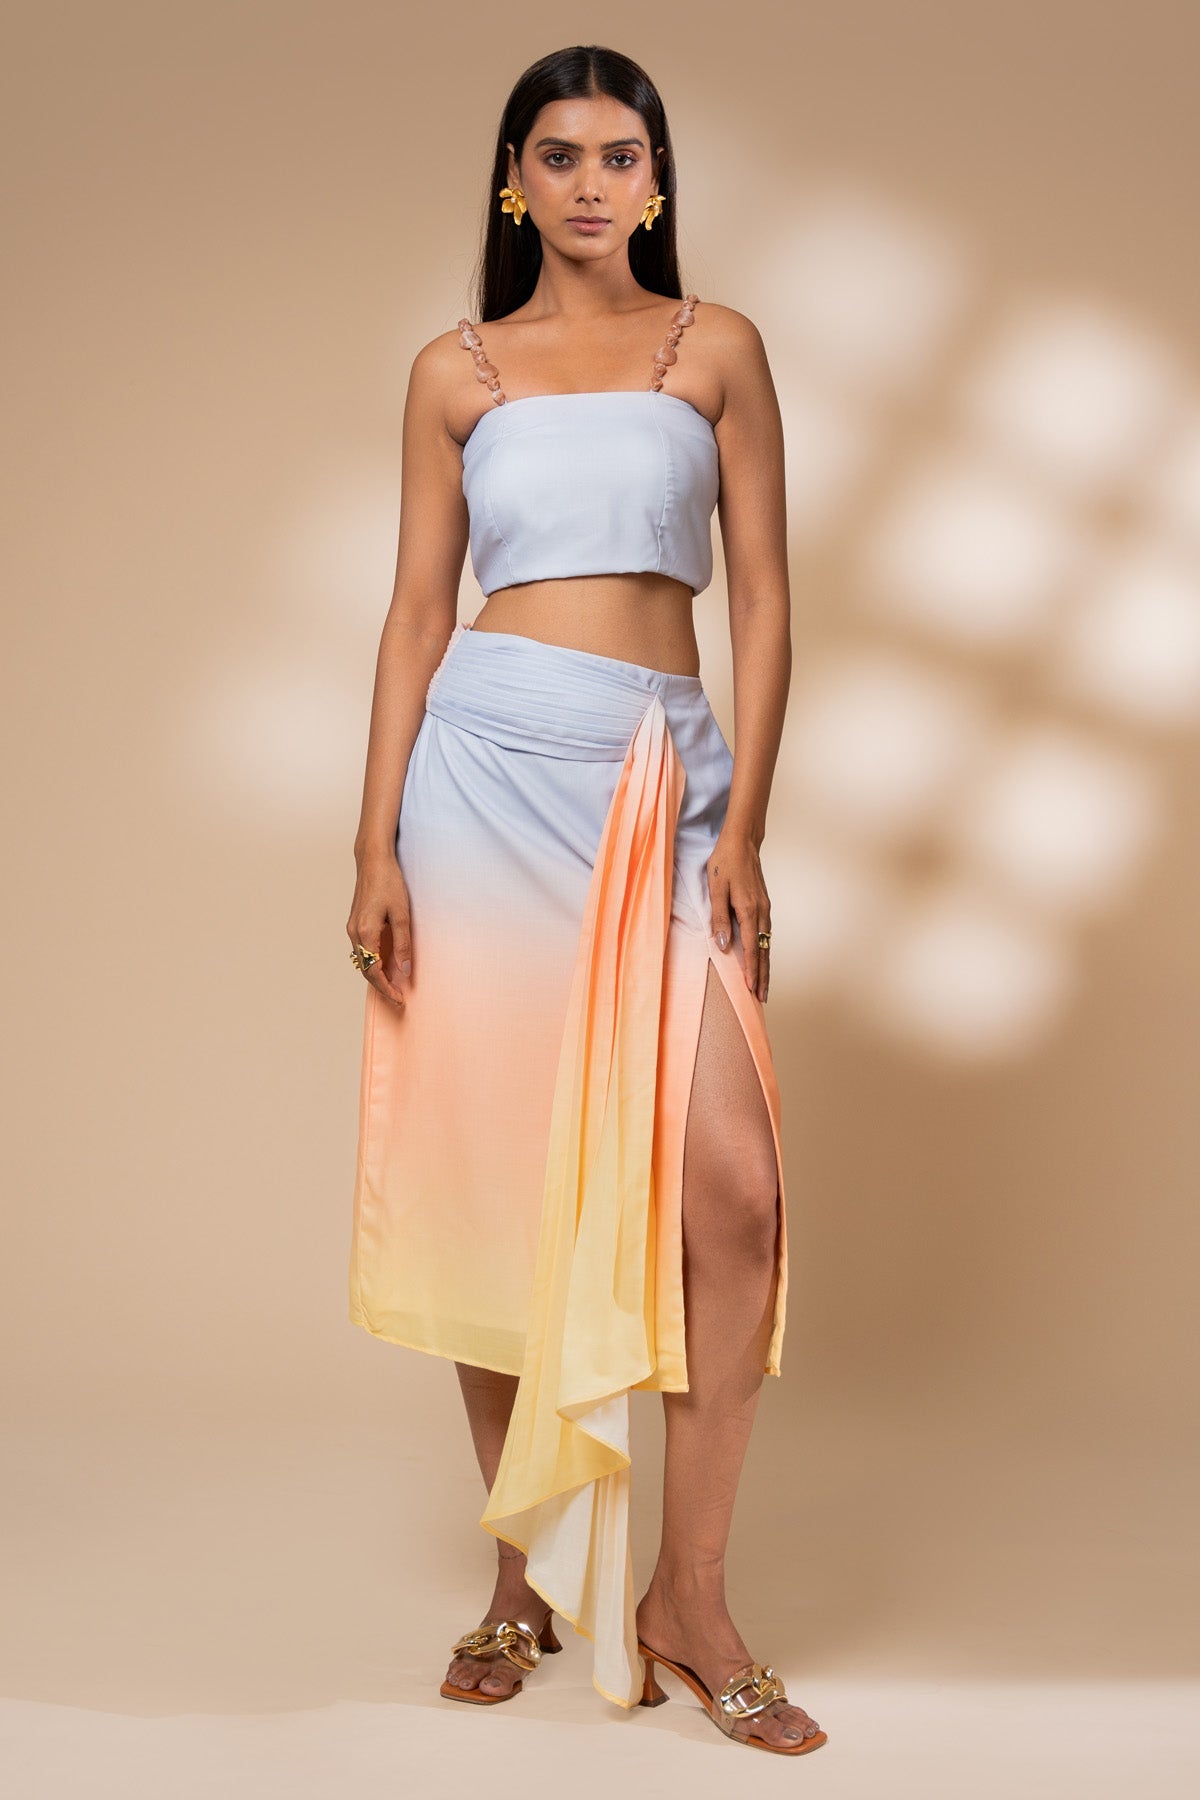 The Decem Ally Multicolor Drape Co-ord Set for Women online available at scrollnshops